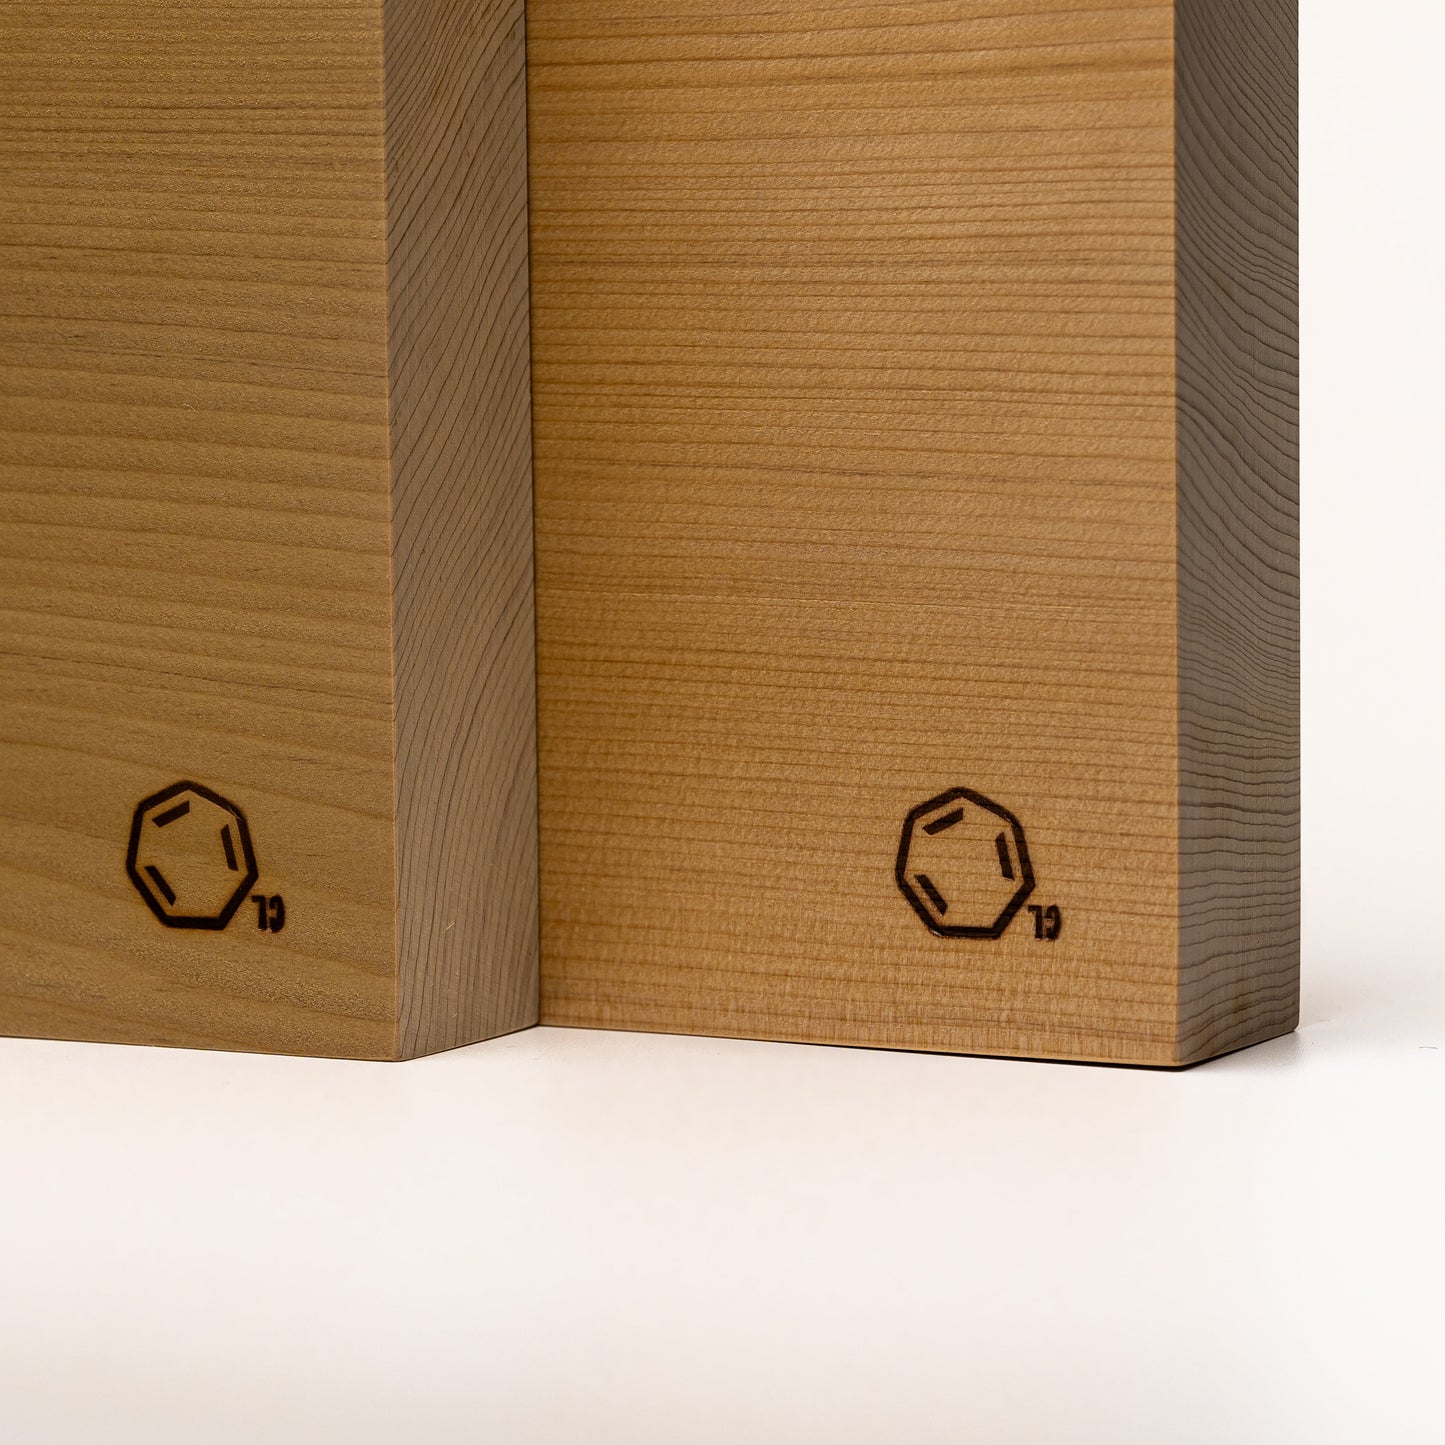 A close up of two Cul de Sac hiba wood chopping boards on a white background